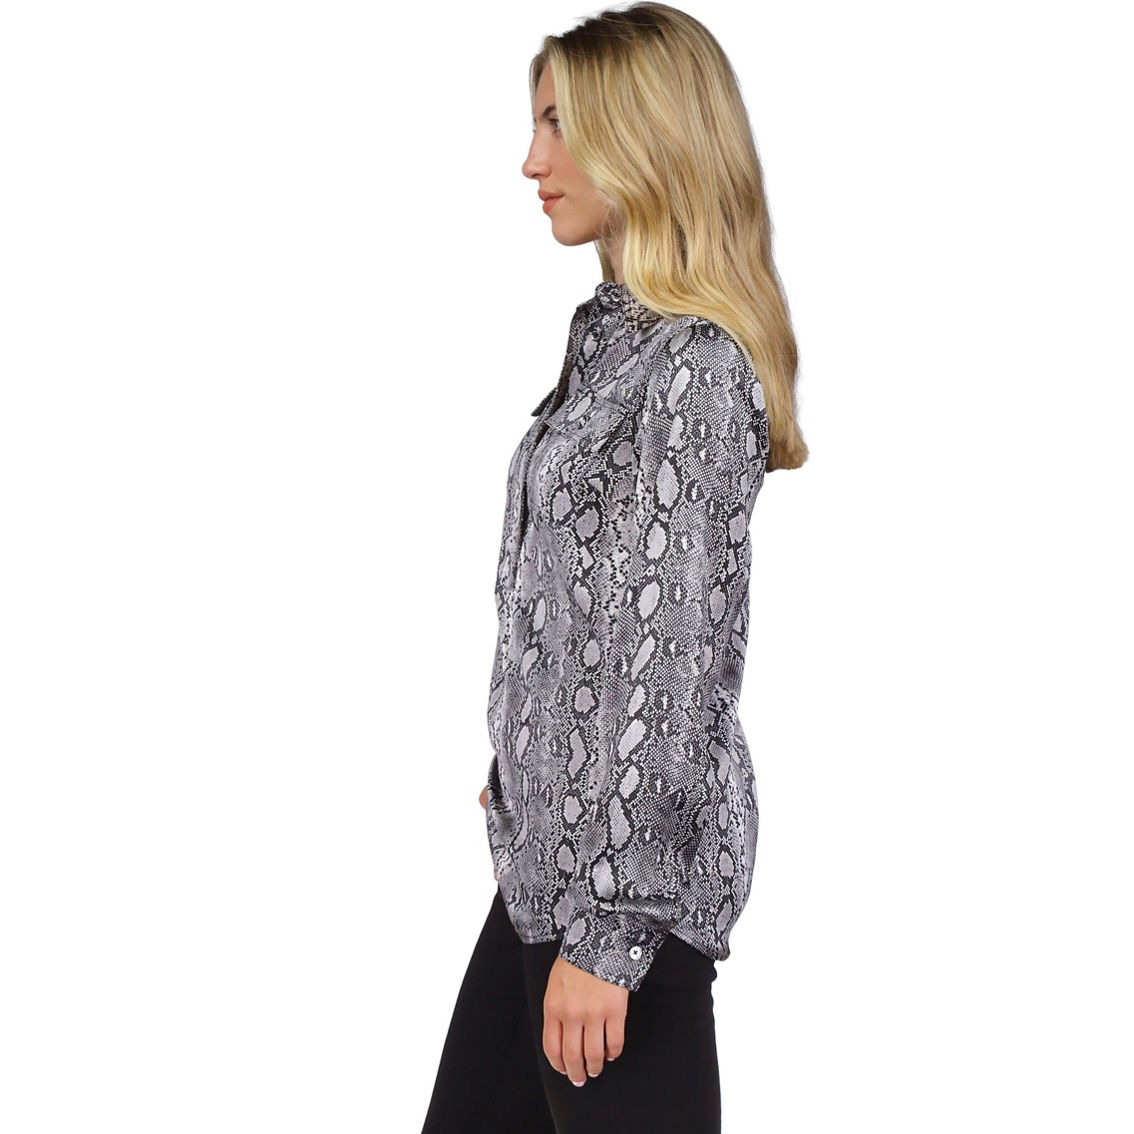 Michael Kors Adder Pullover Tunic - Image 3 of 3